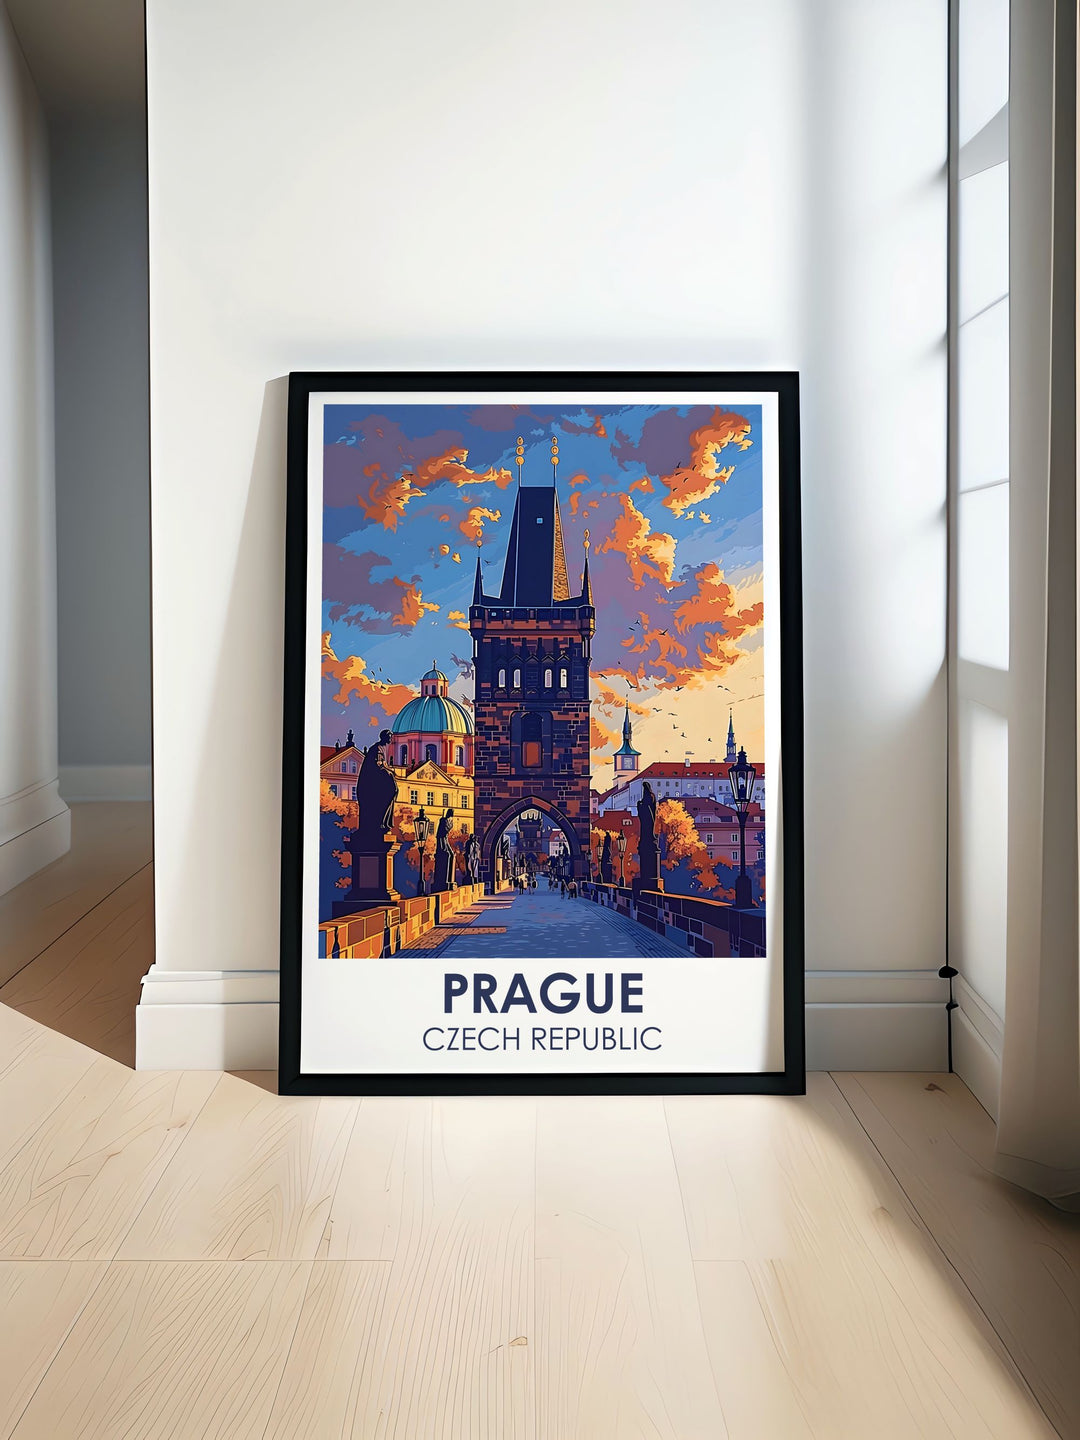 Charles Bridge Karluv Travel Poster featuring the iconic Prague landmark with stunning arches and historic statues. Perfect for Prague Wall Decor and Czech Republic Print enthusiasts. Enhance your home with this beautiful Prague Illustration.